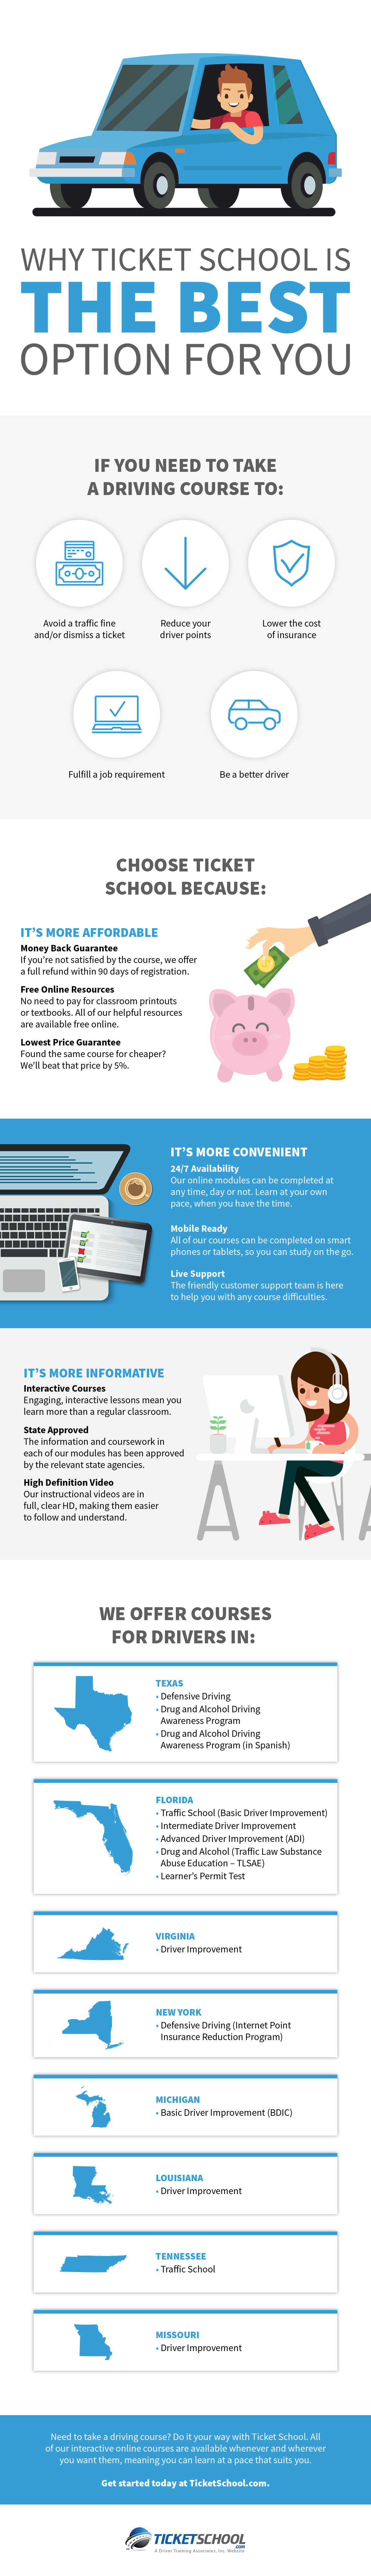 Why Ticket School Is The Best Option for You Infographic